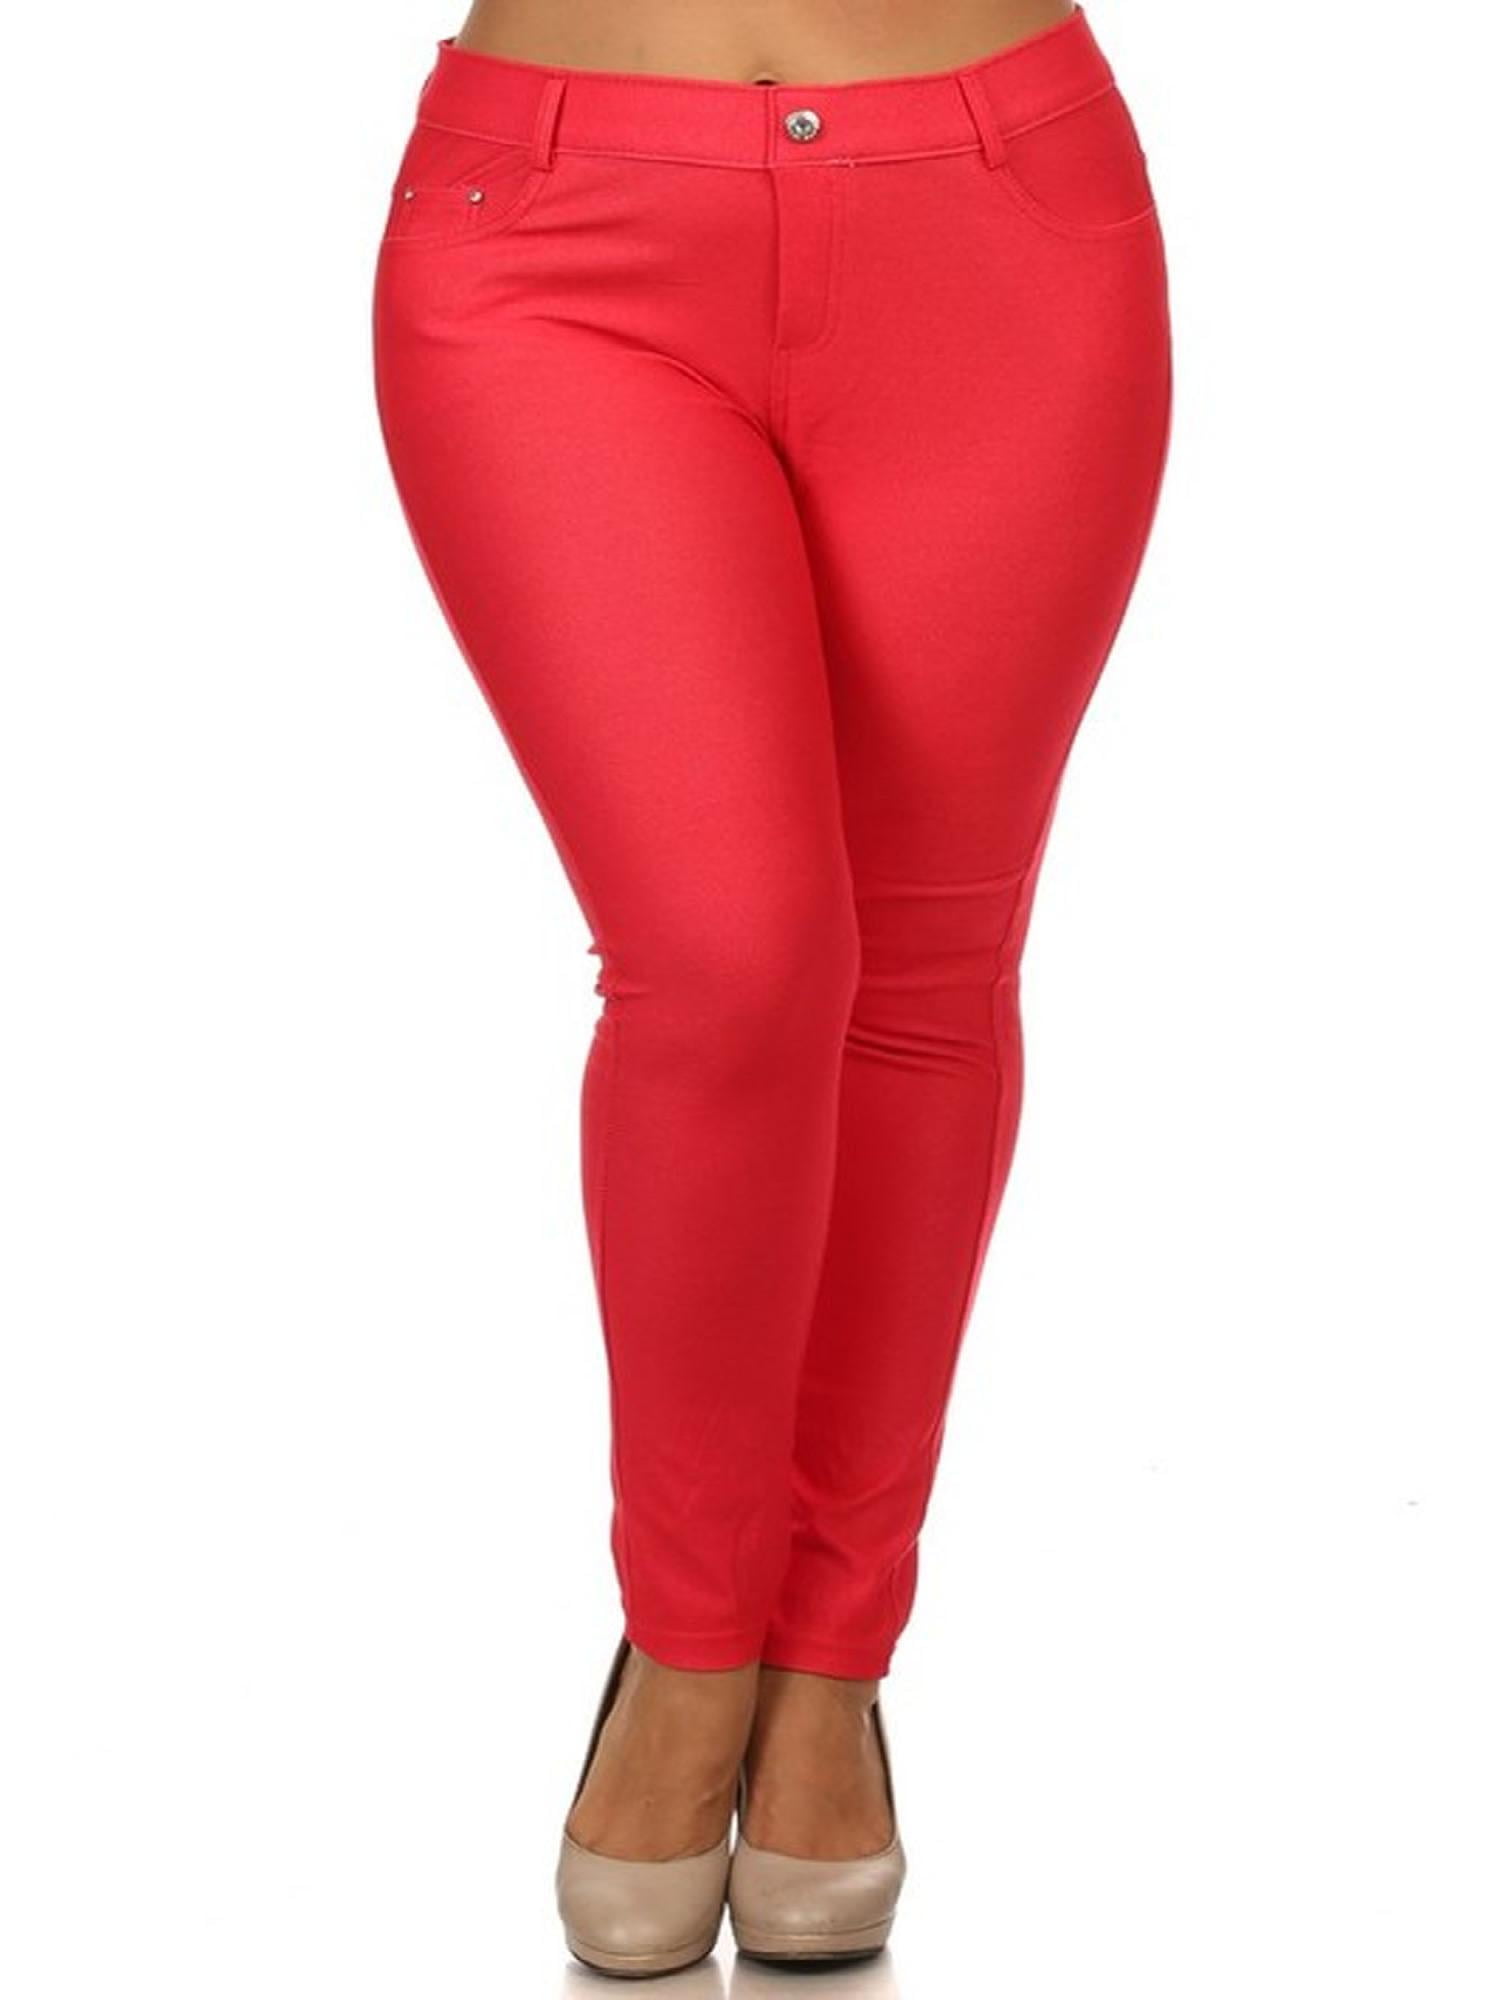 Plus Size Solid Casual Lightweight Stretchy Jean Pocket Pants - Walmart.com